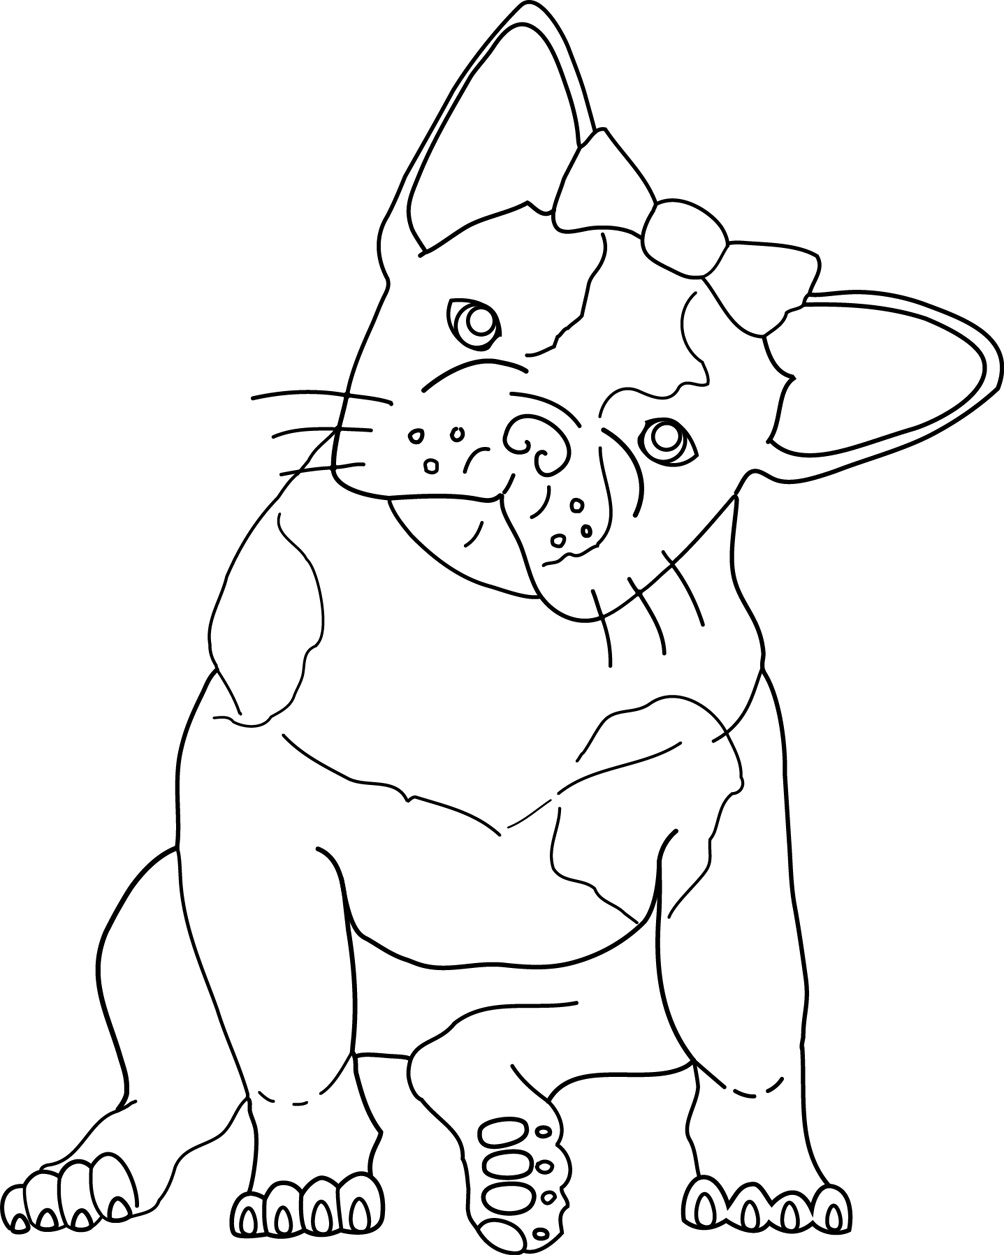 706 Cute French Bulldog Coloring Pages with Animal character